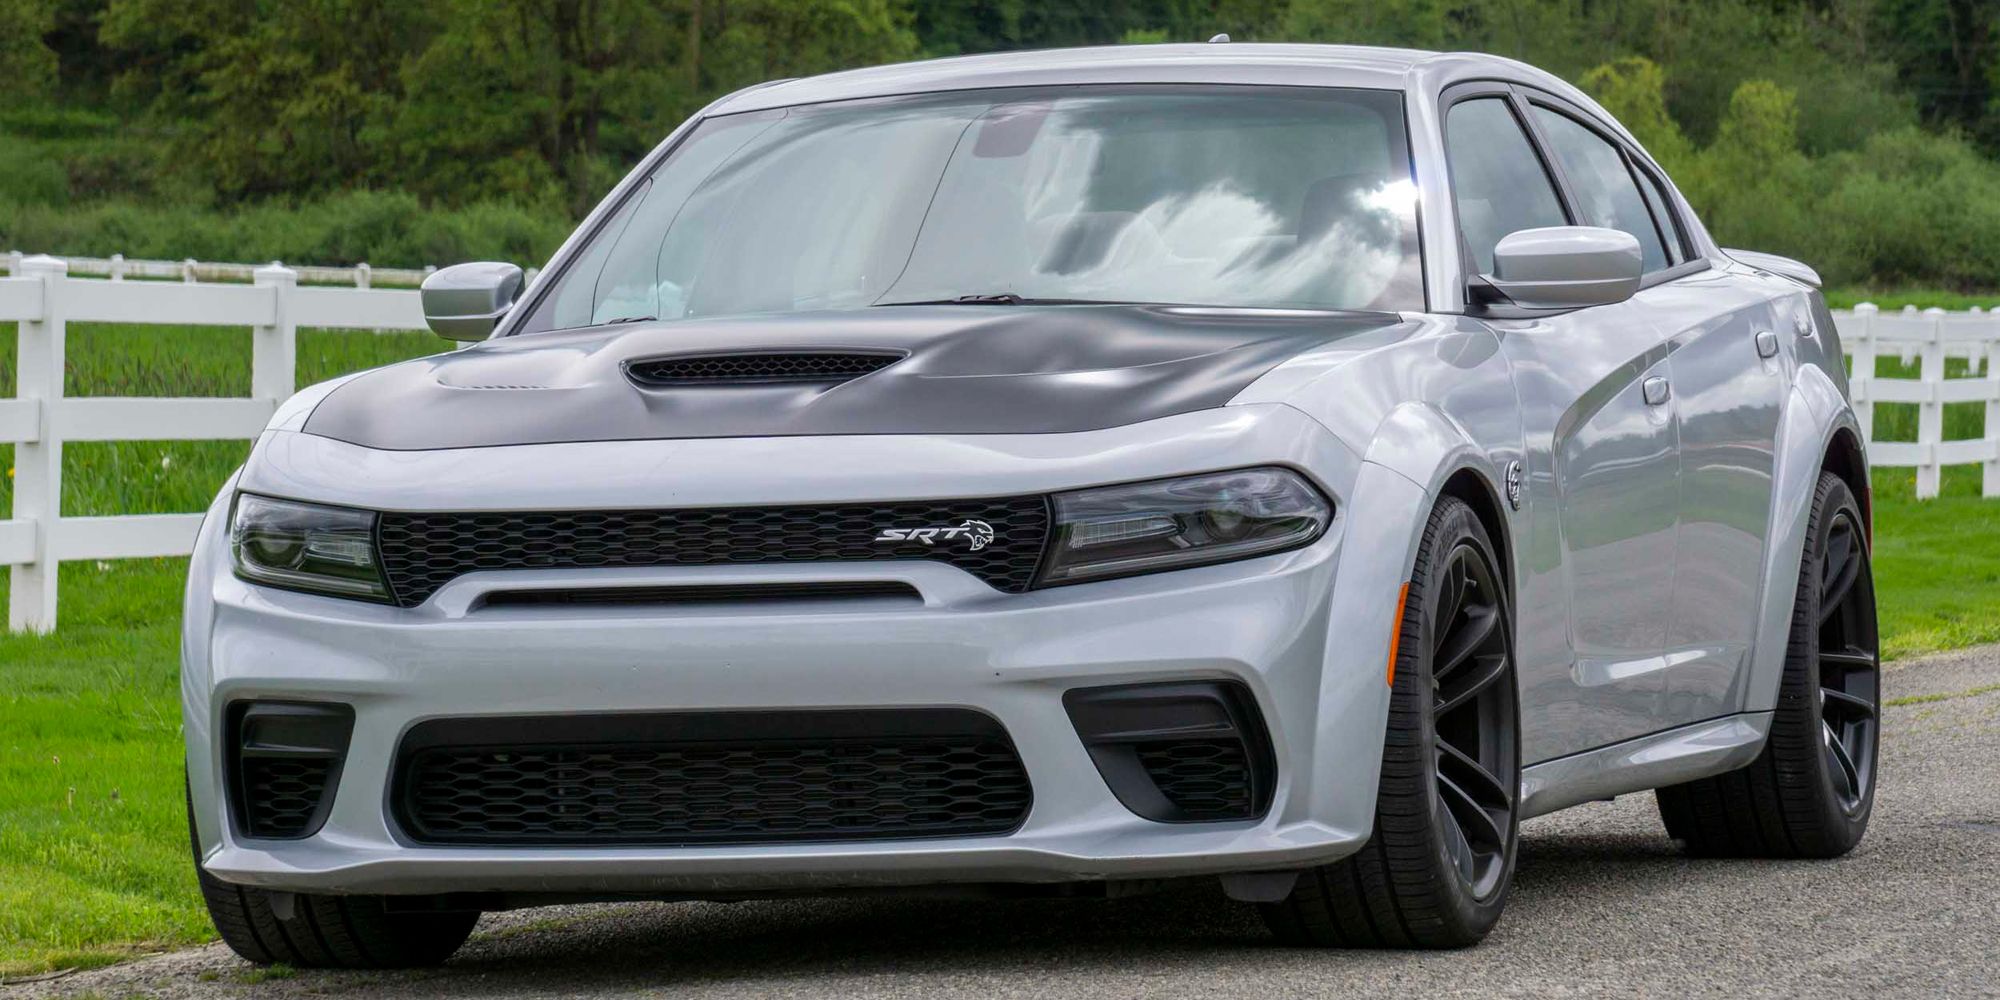 The front of the Charger Hellcat Widebody